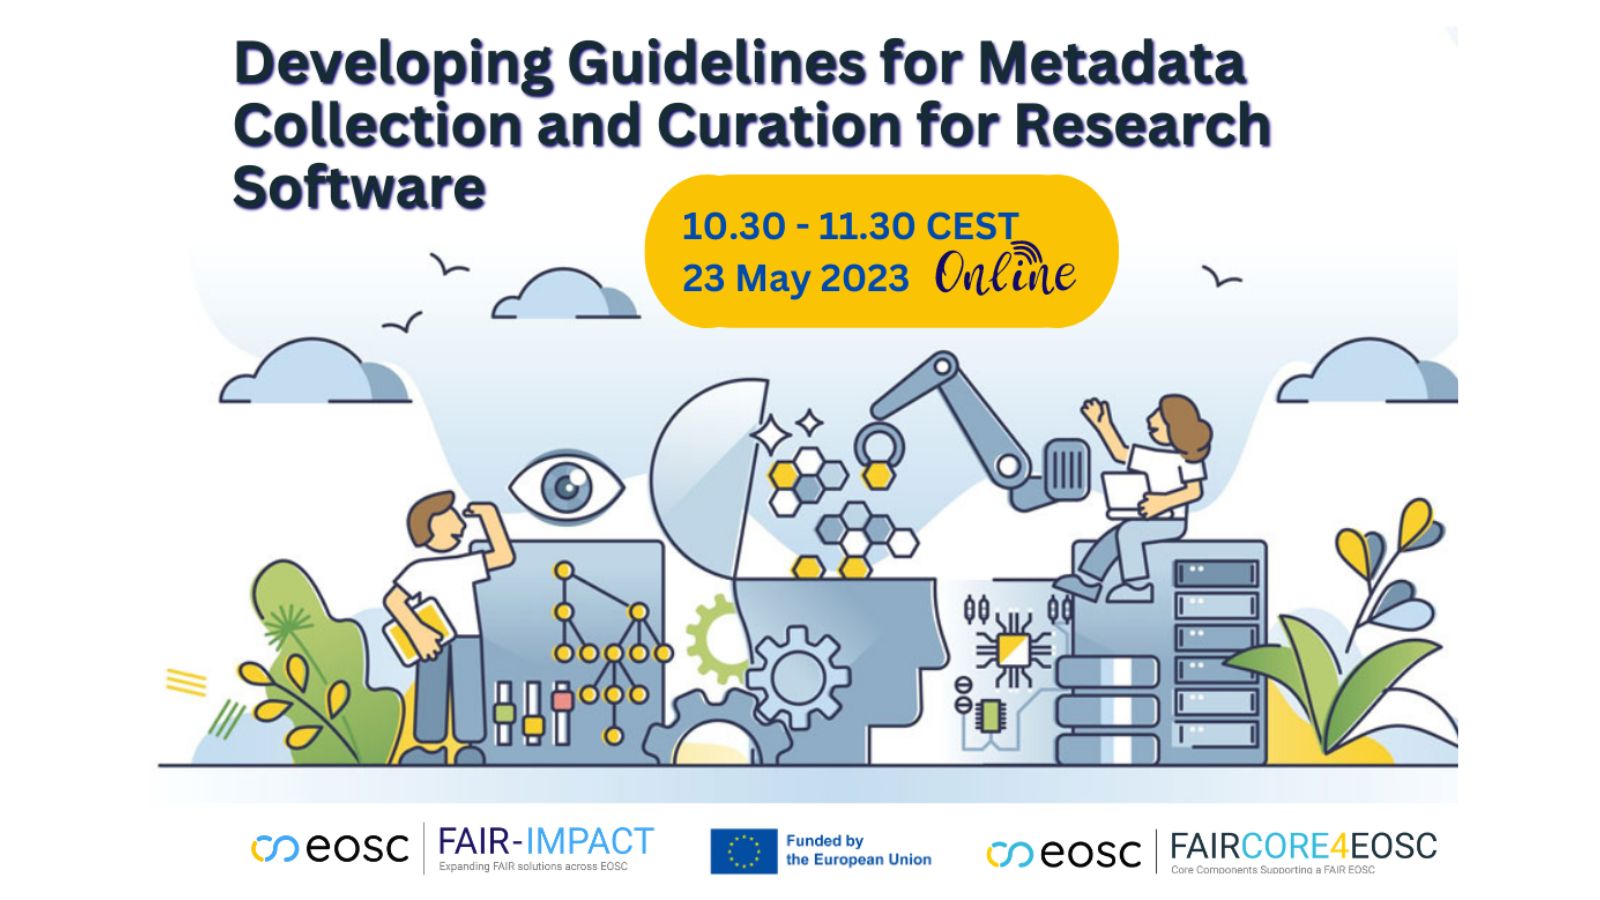 Developing Guidelines for Metadata Collection and Curation in Research Software